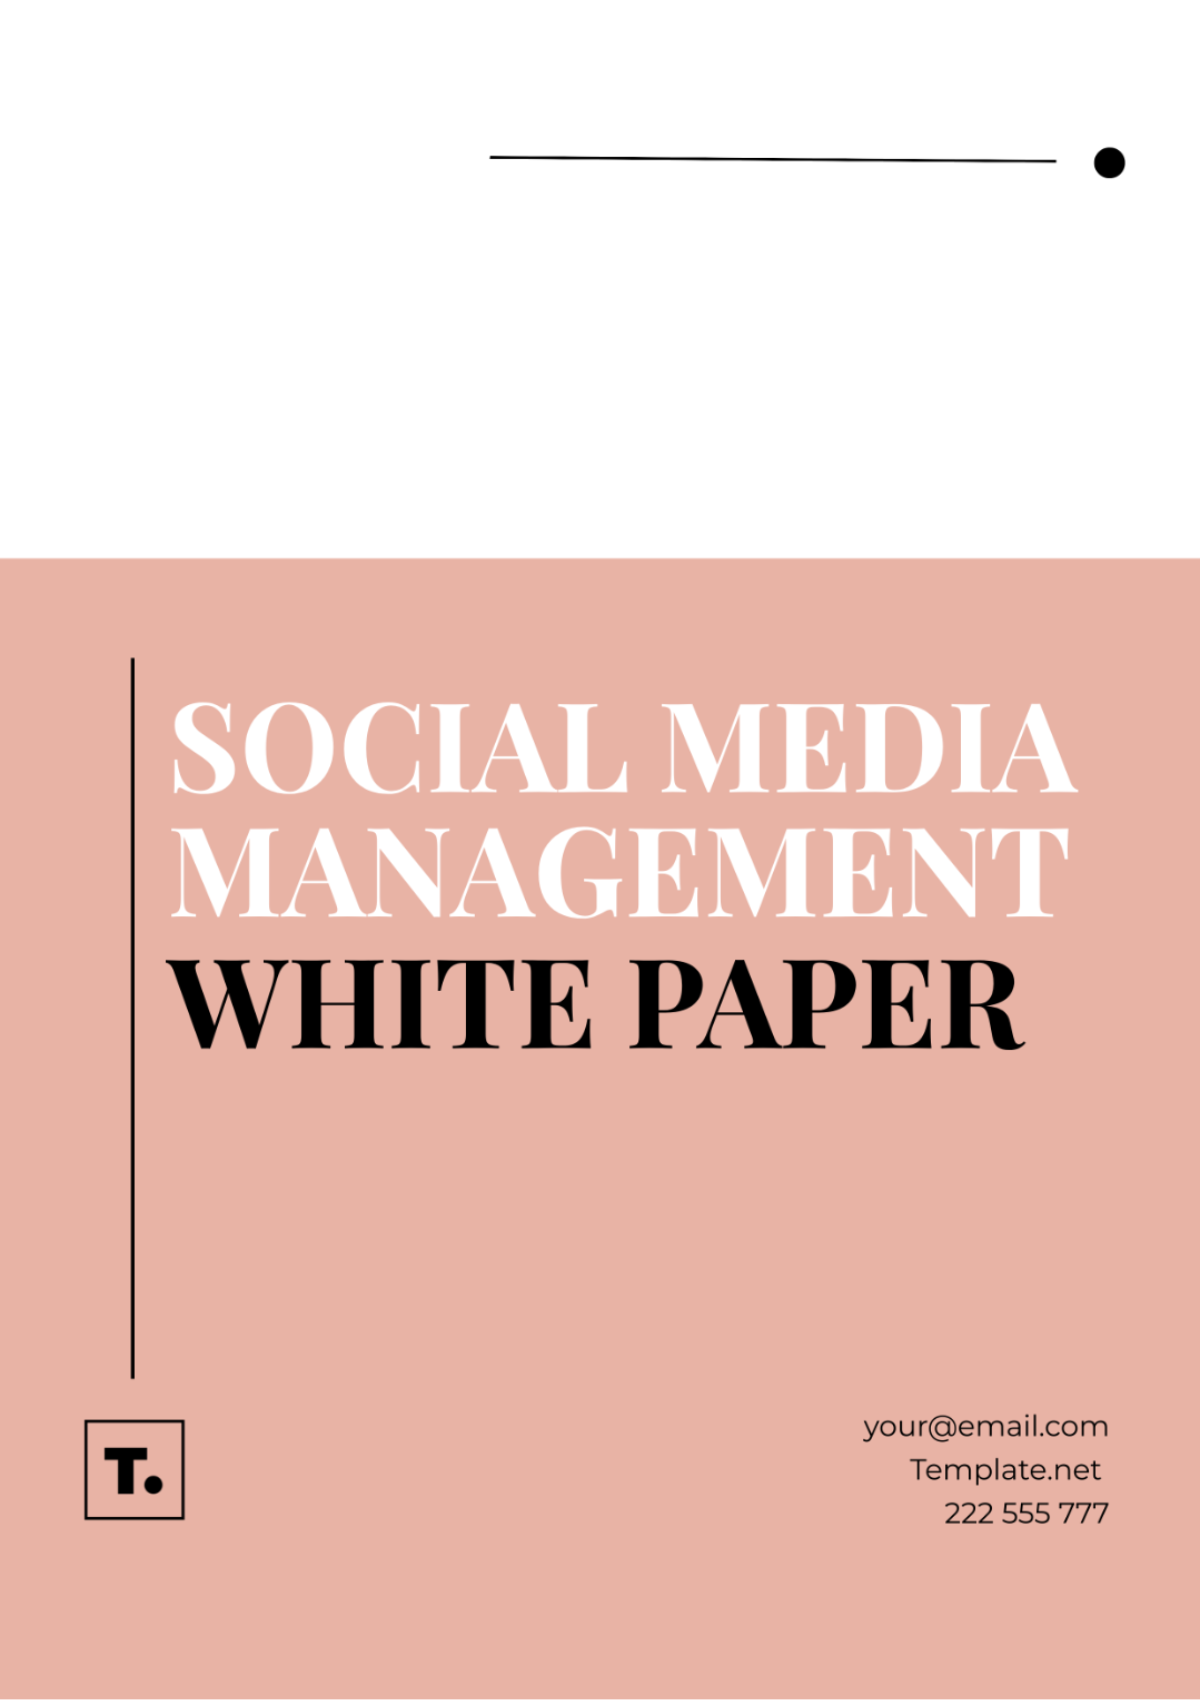 Free Social Media Management White Paper Template